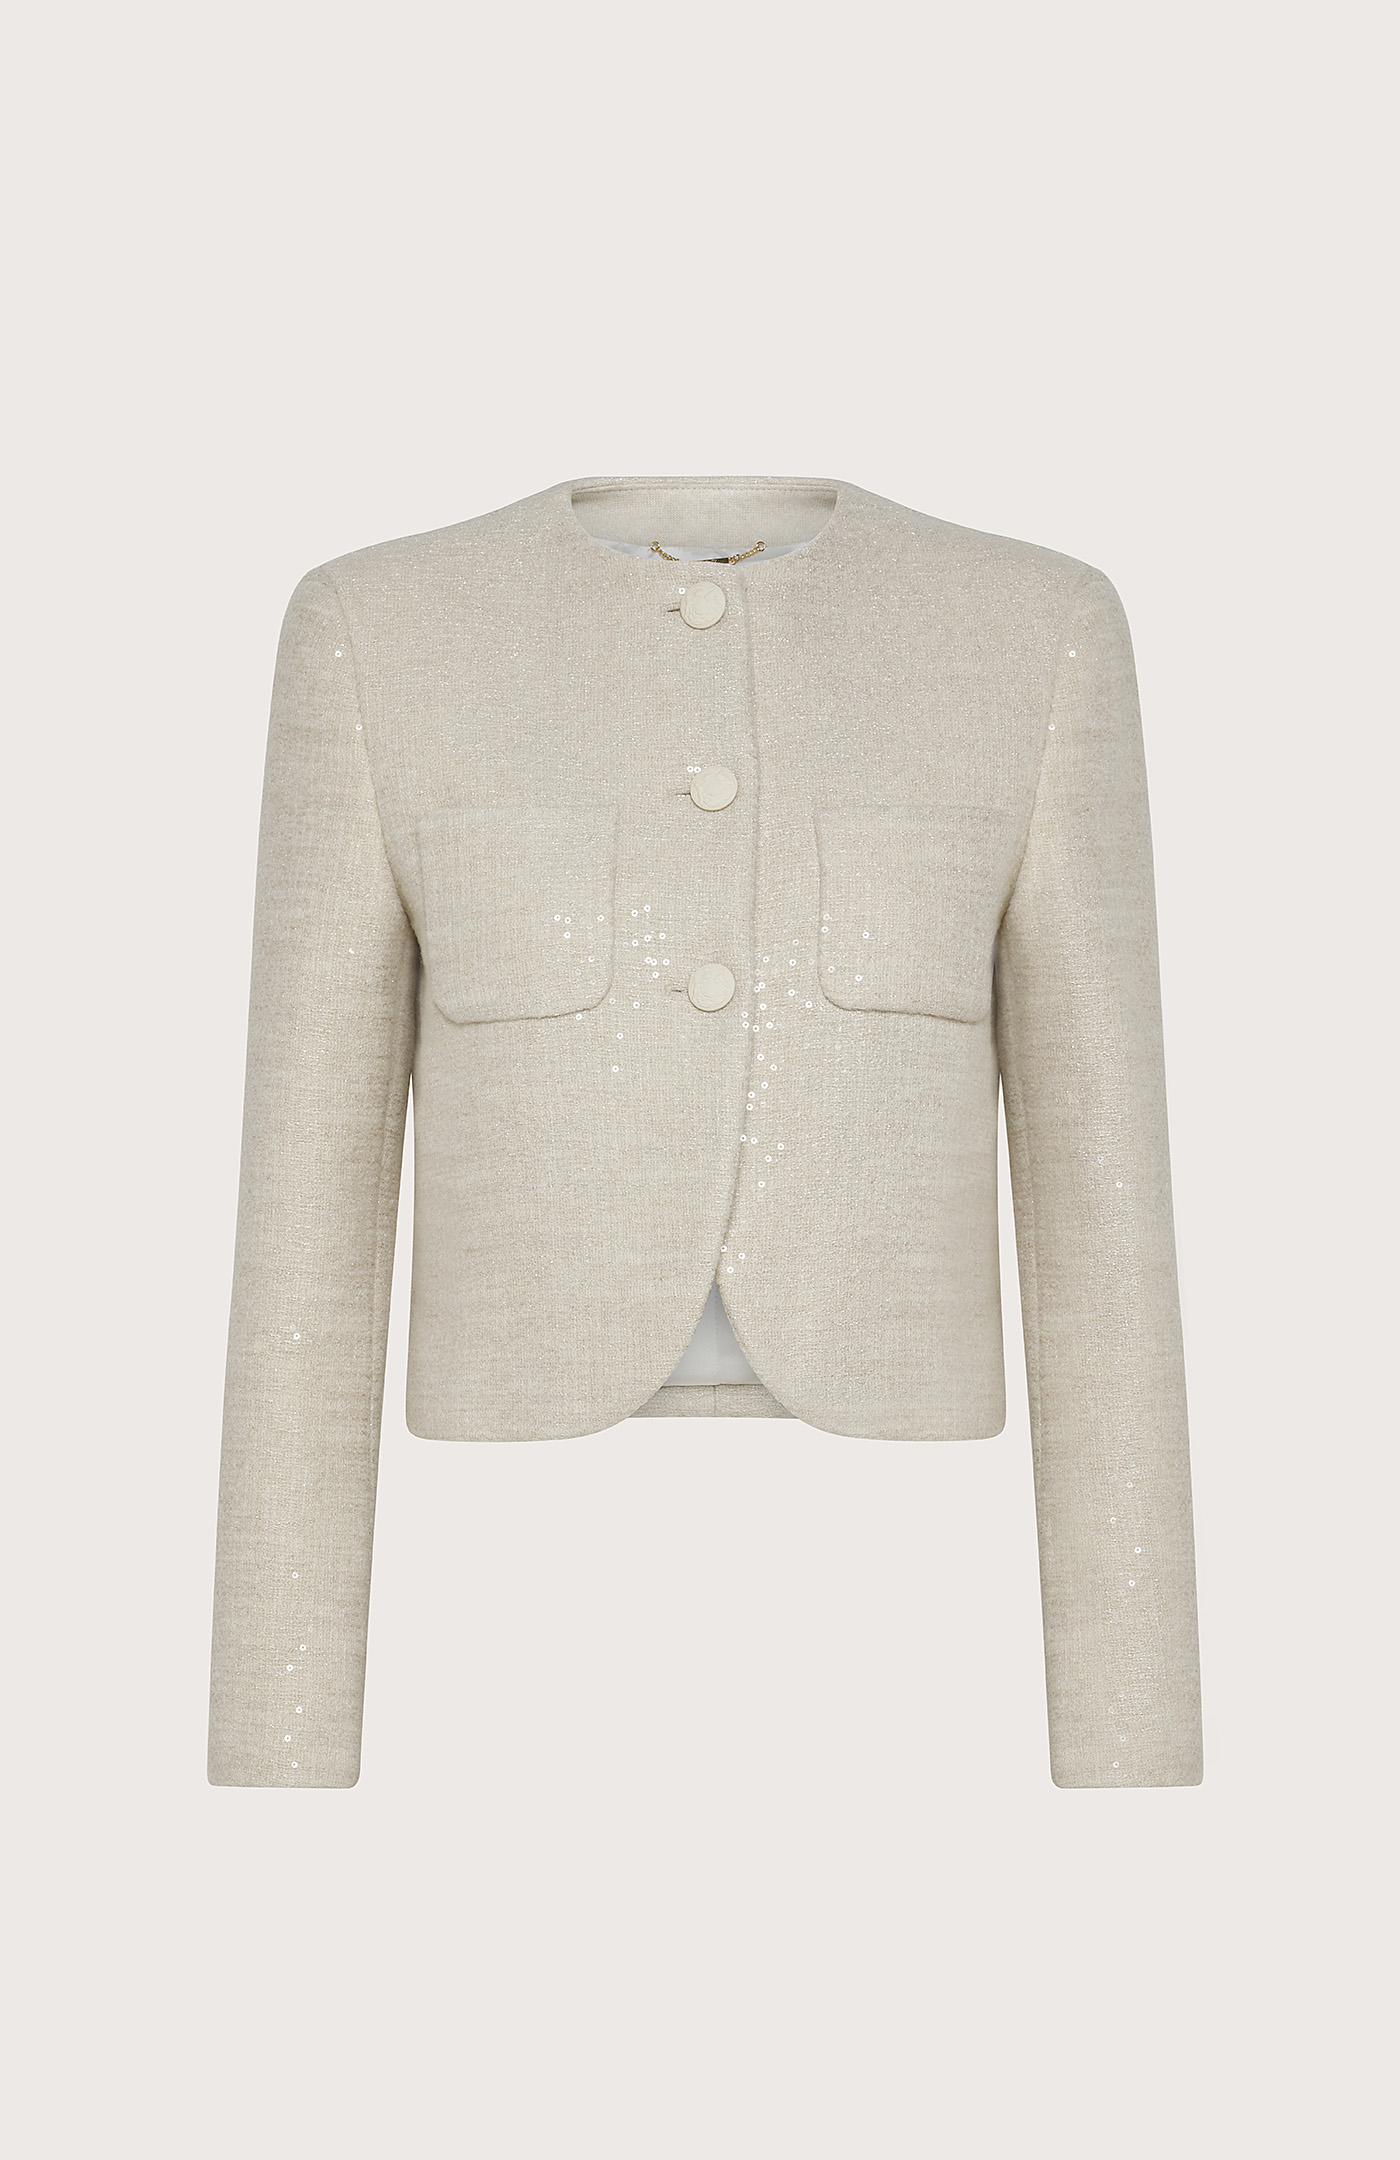 Chanel-fabric short jacket with sequins - Col. Neutral